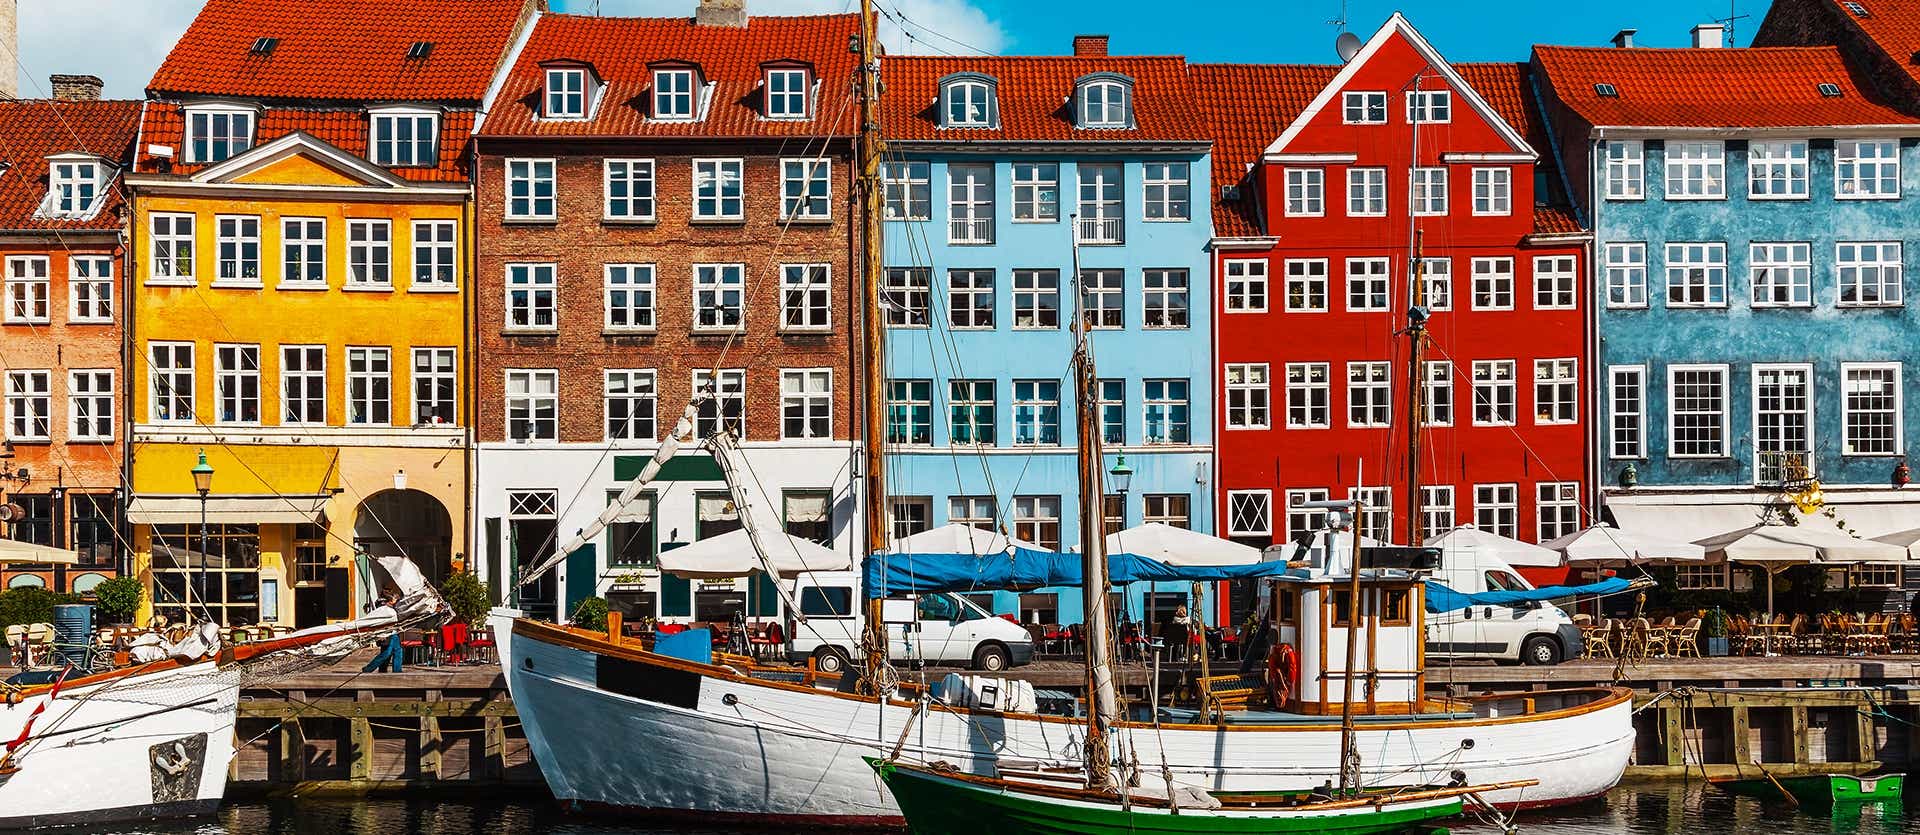 Colorful Buildings of Nyhavn <span class="iconos separador"></span> Copenhagen <span class="iconos separador"></span> Denmark